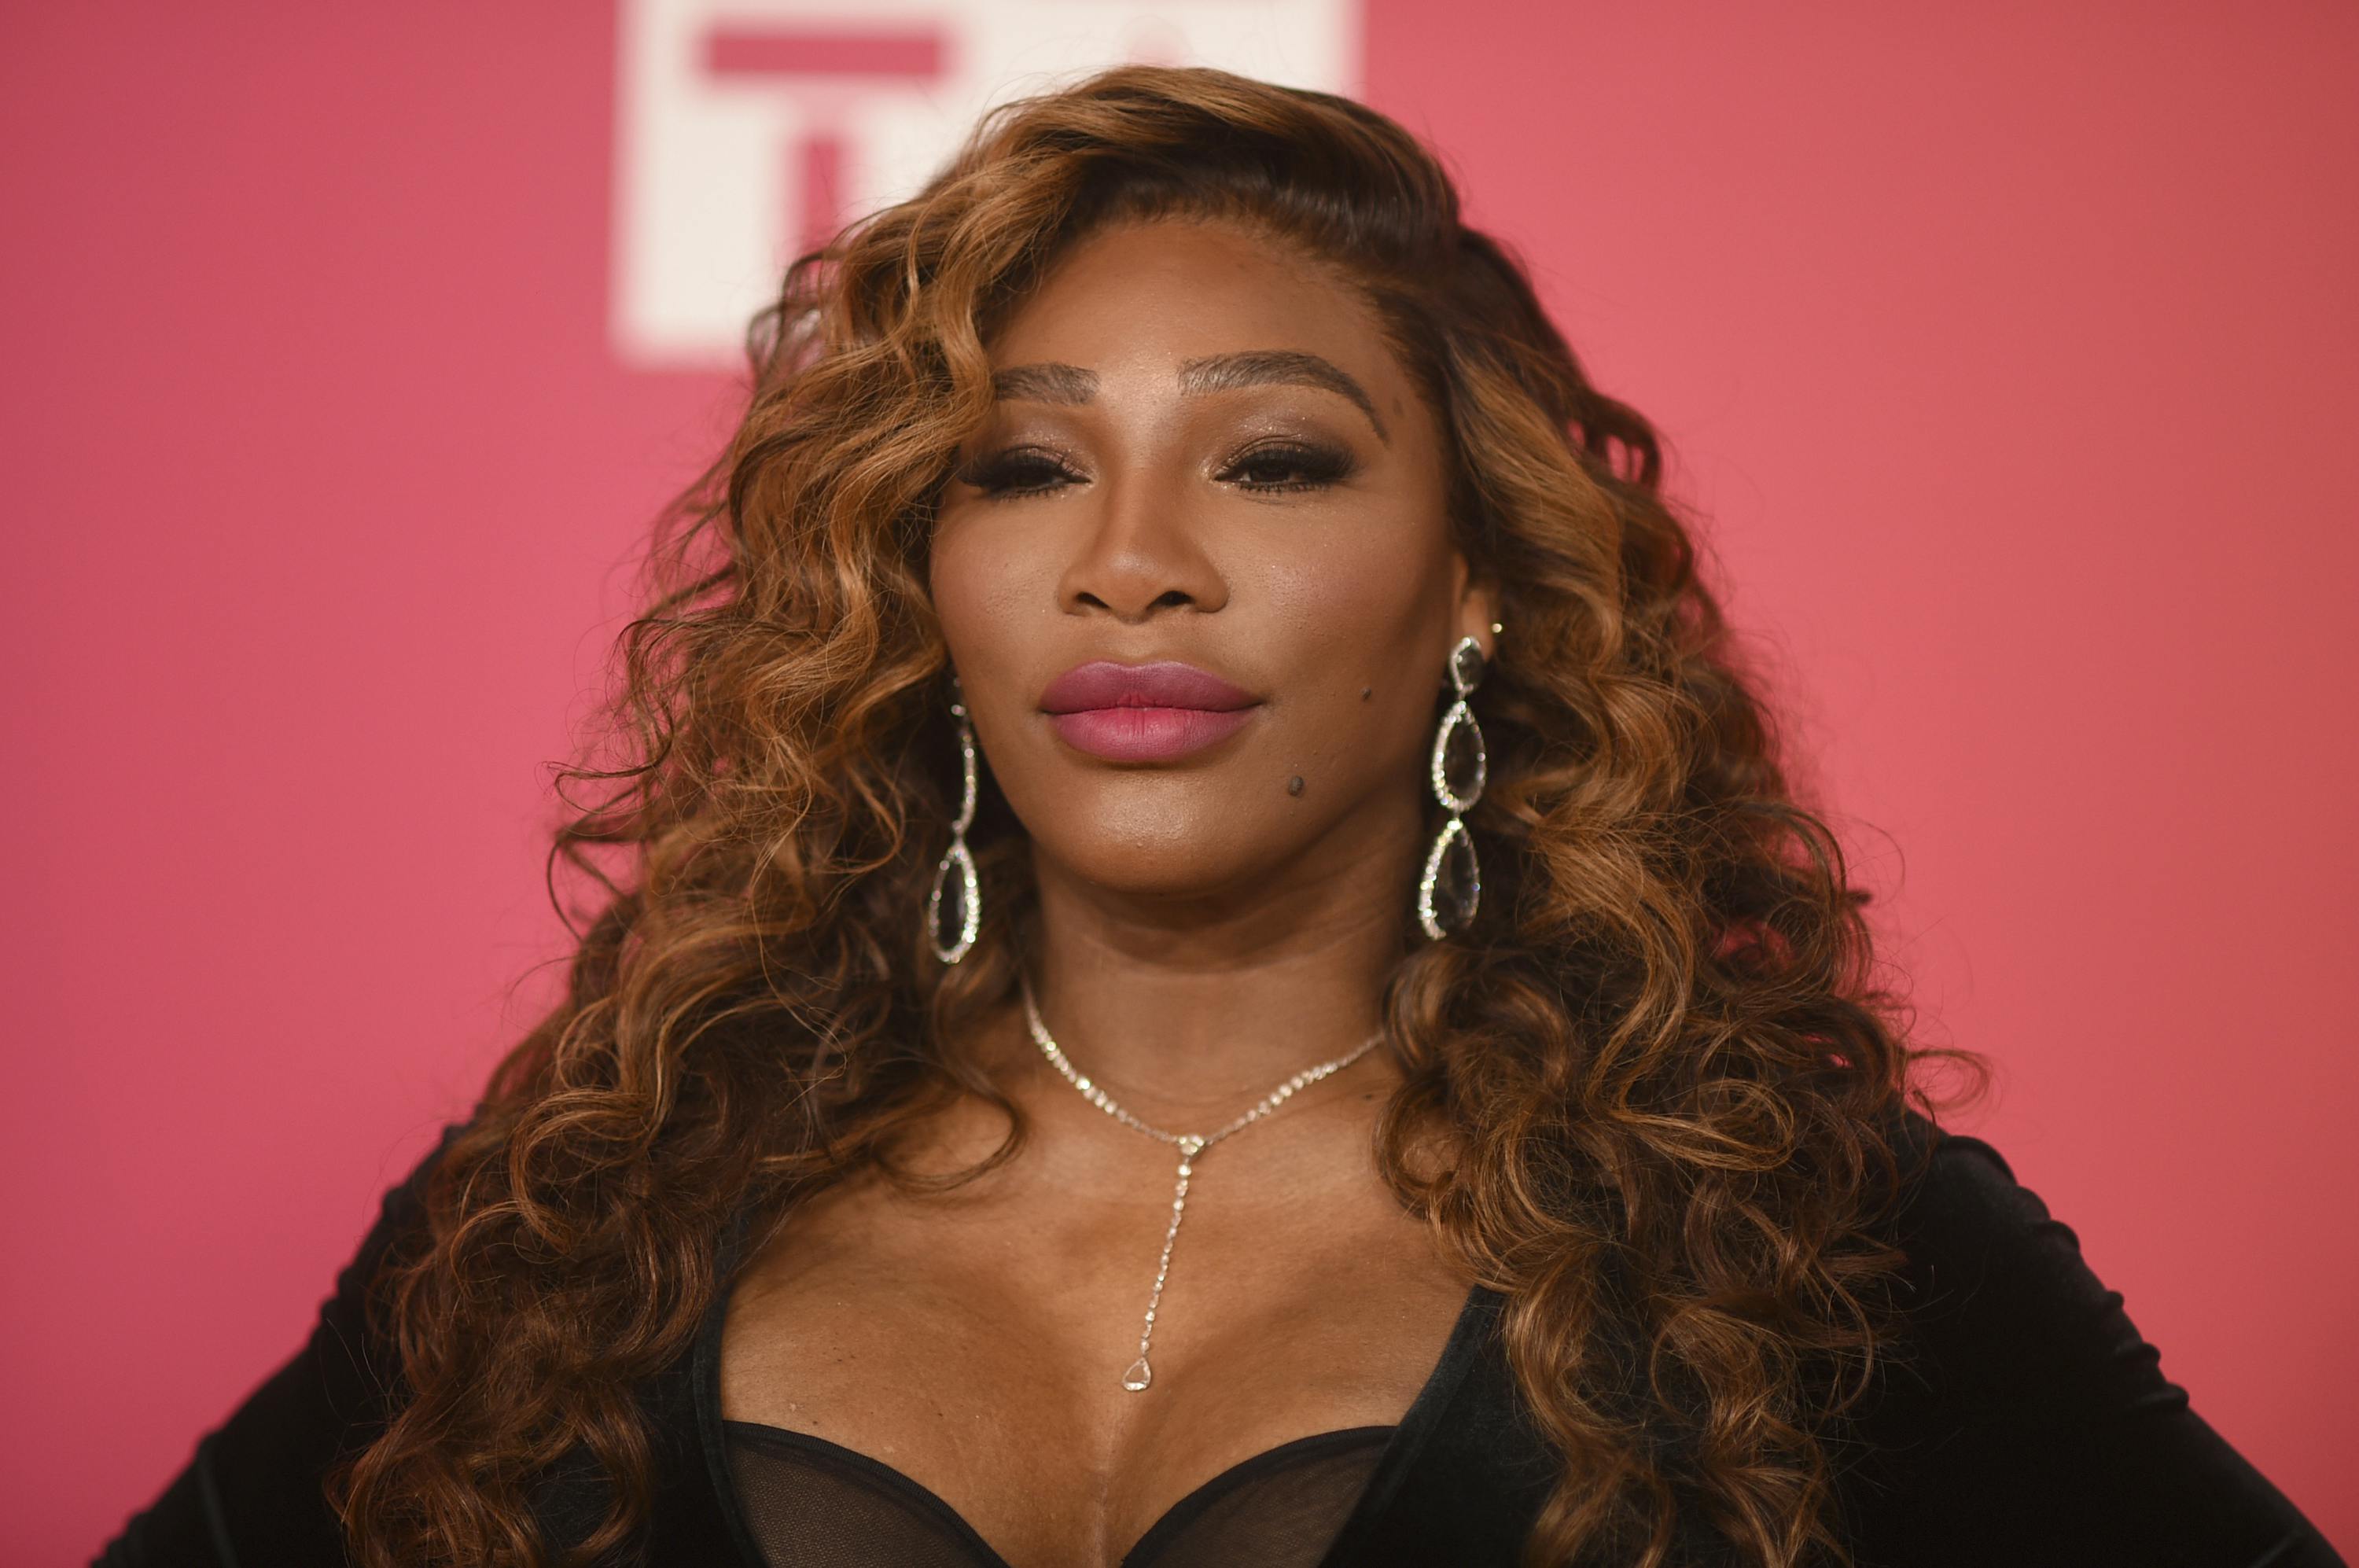 Serena Williams arrives at the 54th NAACP Image Awards on Saturday, Feb. 25, 2023, at the Civic Auditorium in Pasadena, Calif. (Photo by Richard Shotwell/Invision/AP)